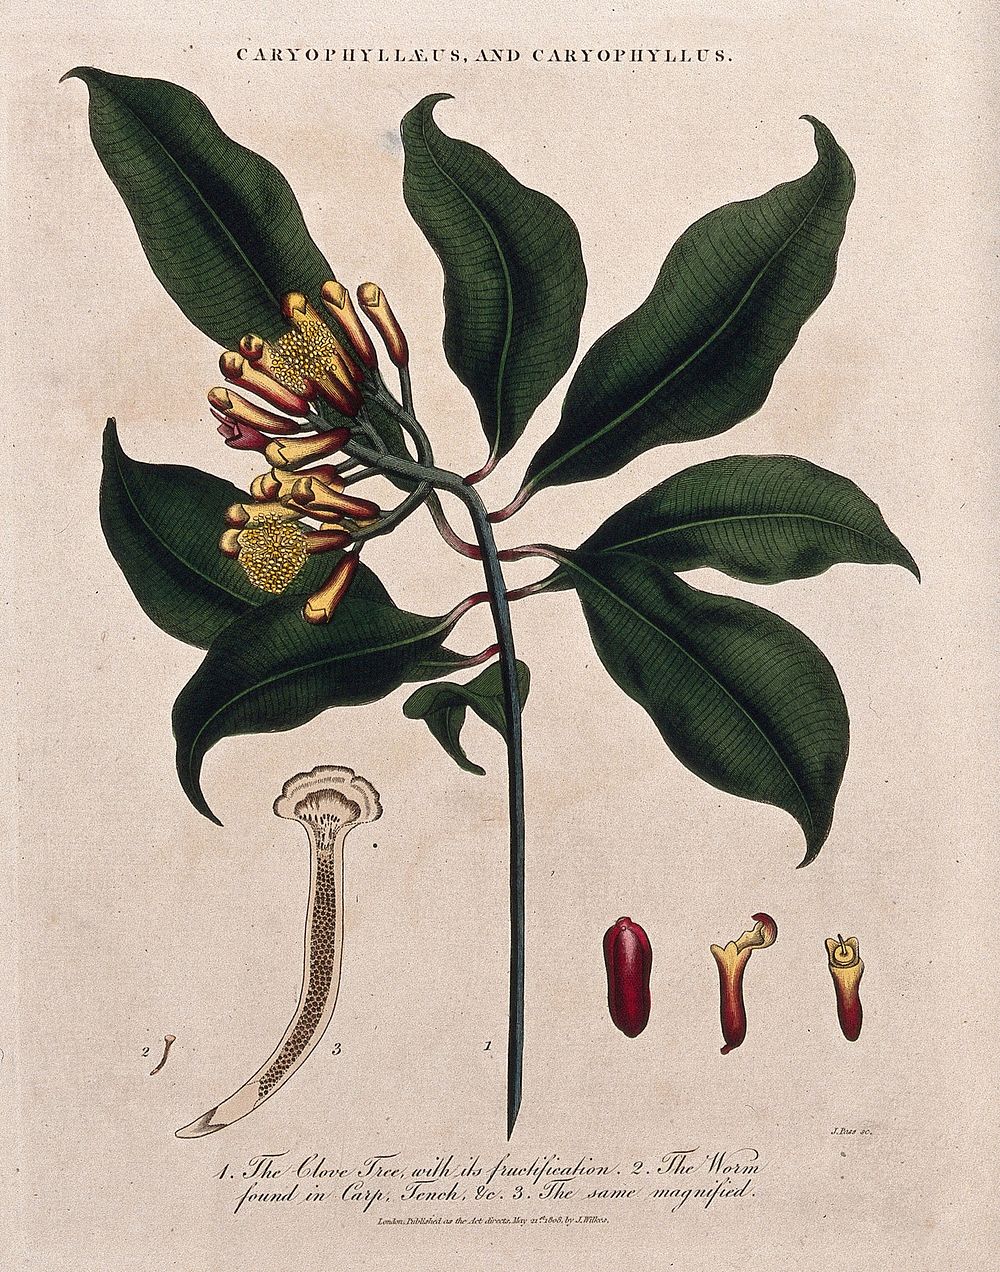 Clove tree (Syzygium aromaticum): flowering and fruiting stem with cloves and parasitic worm. Coloured etching by J. Pass…